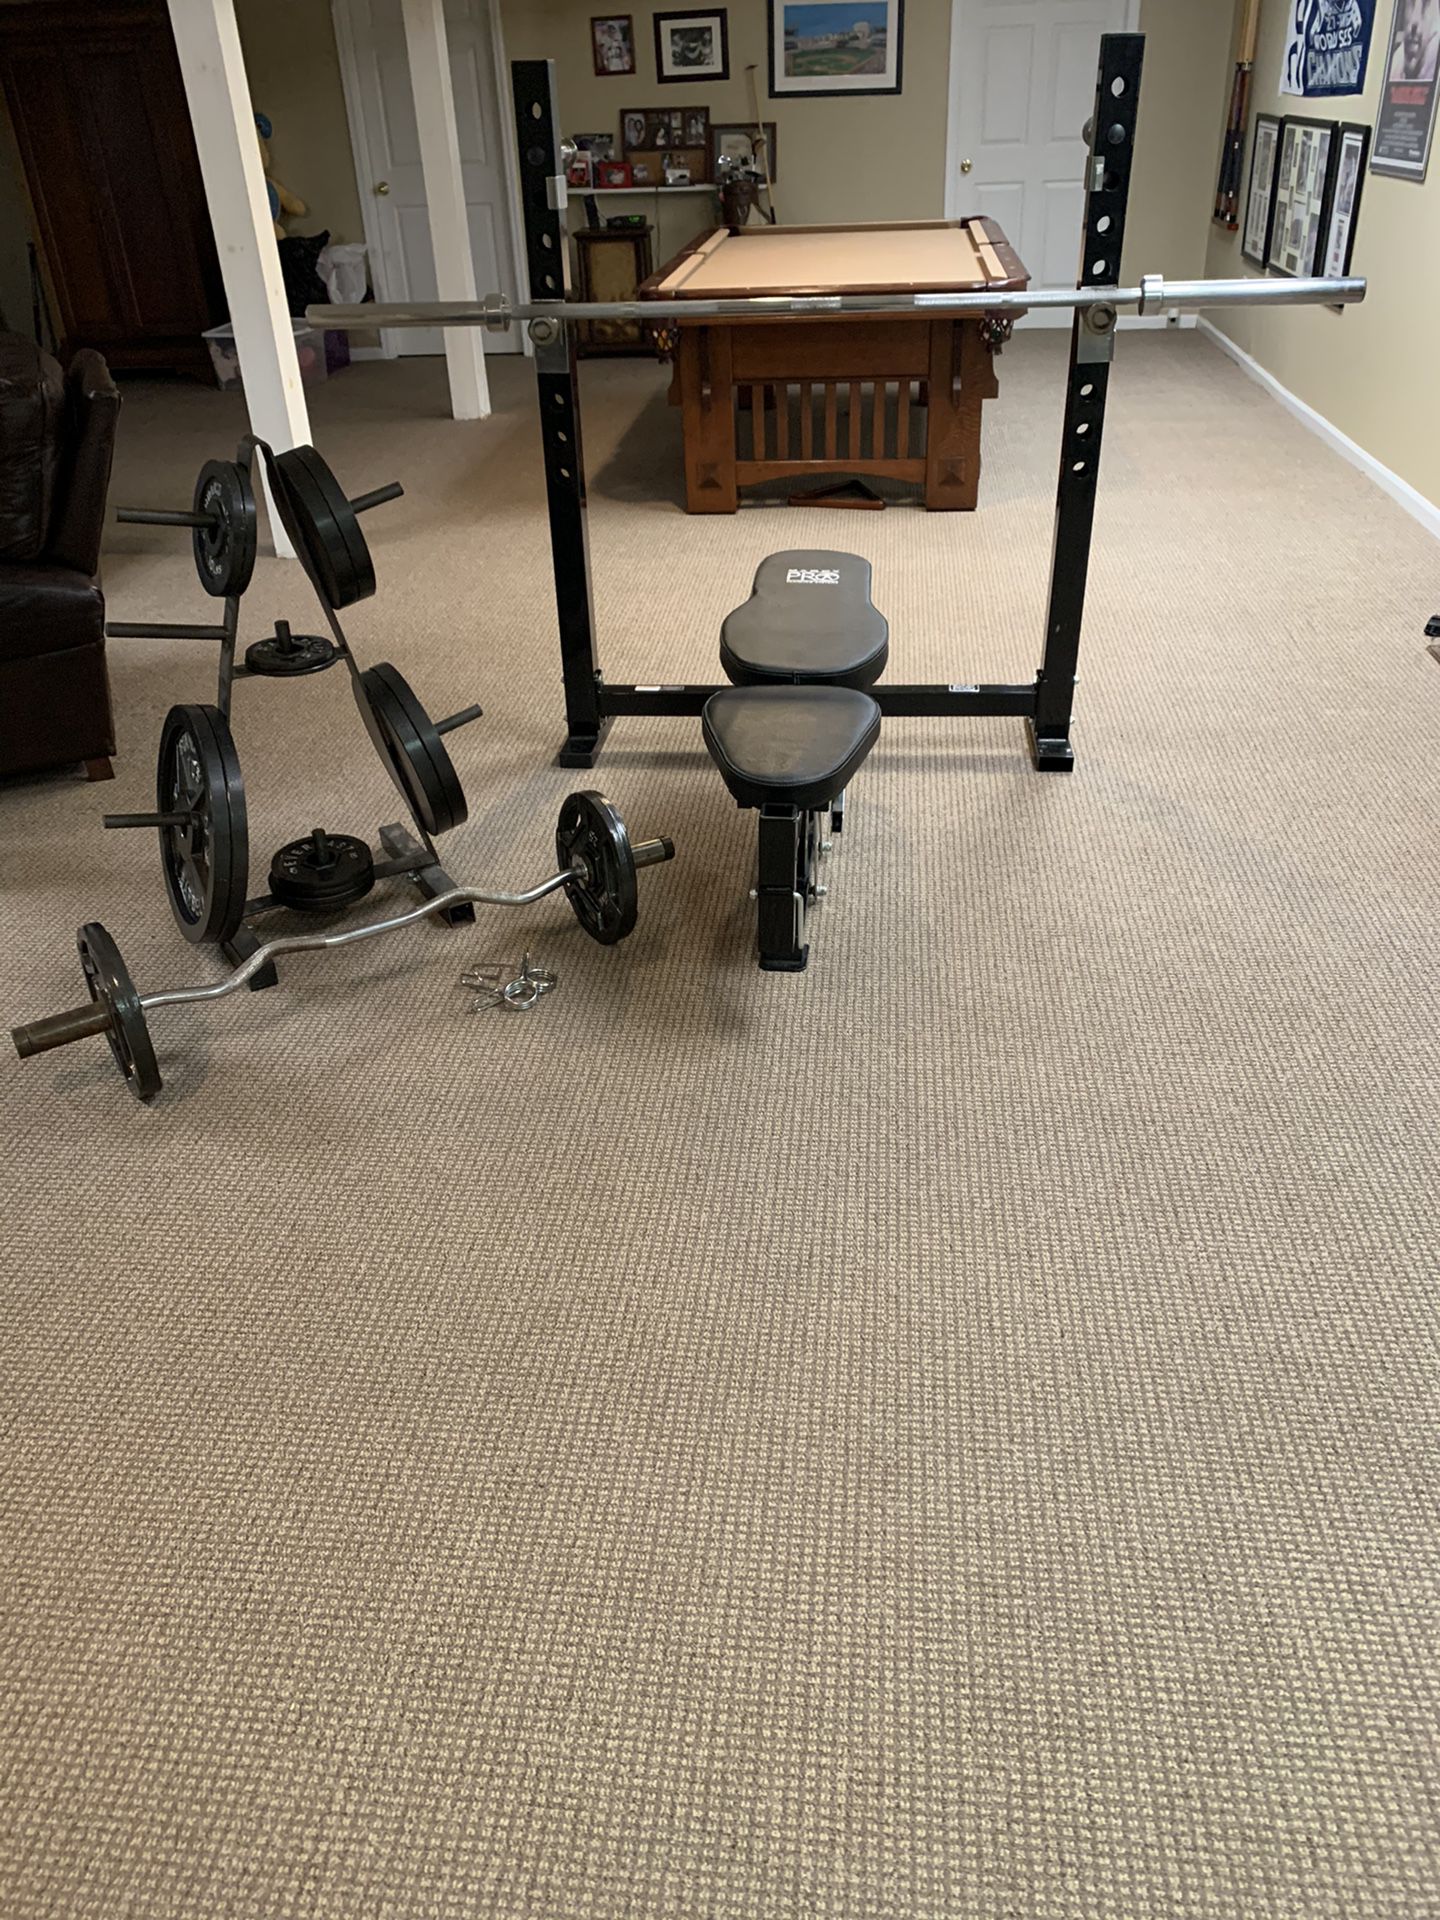 Weight bench, squat rack, weight plates, barbell